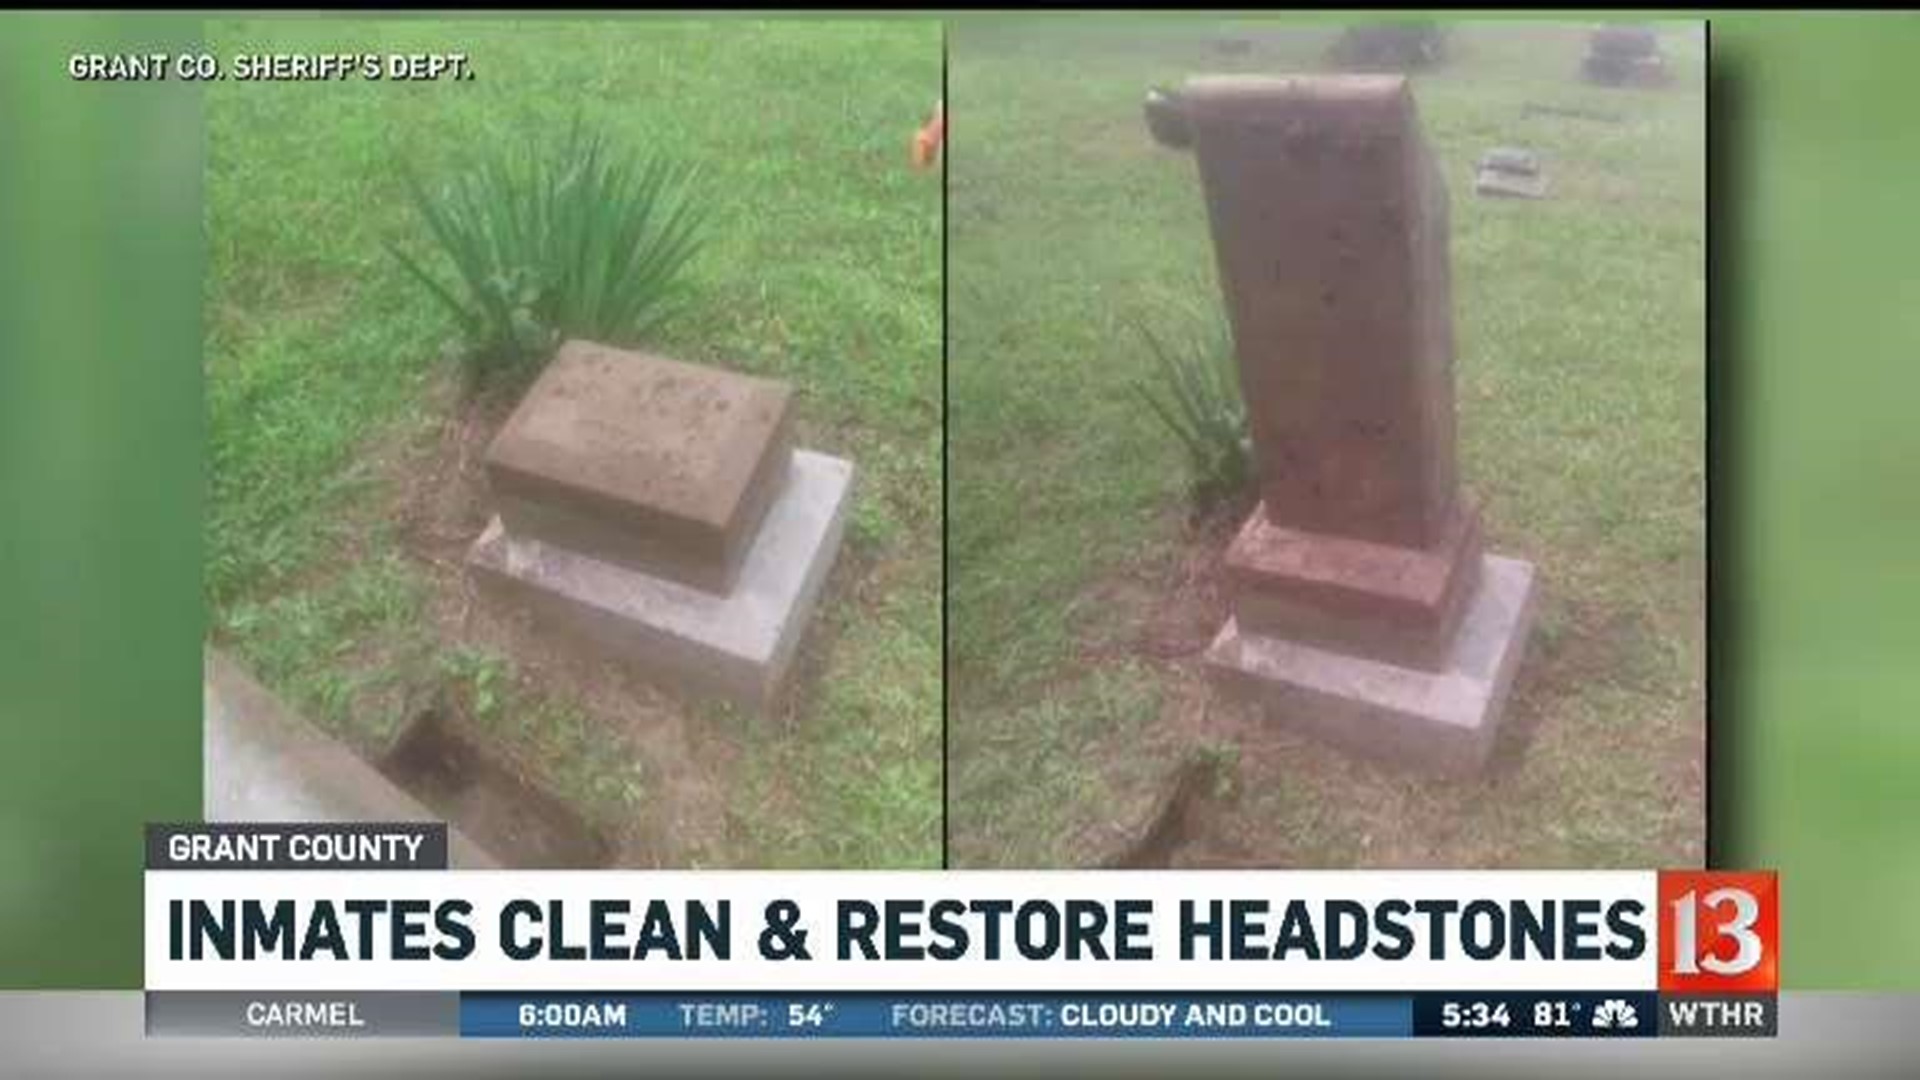 Inmates clean and restore headstones